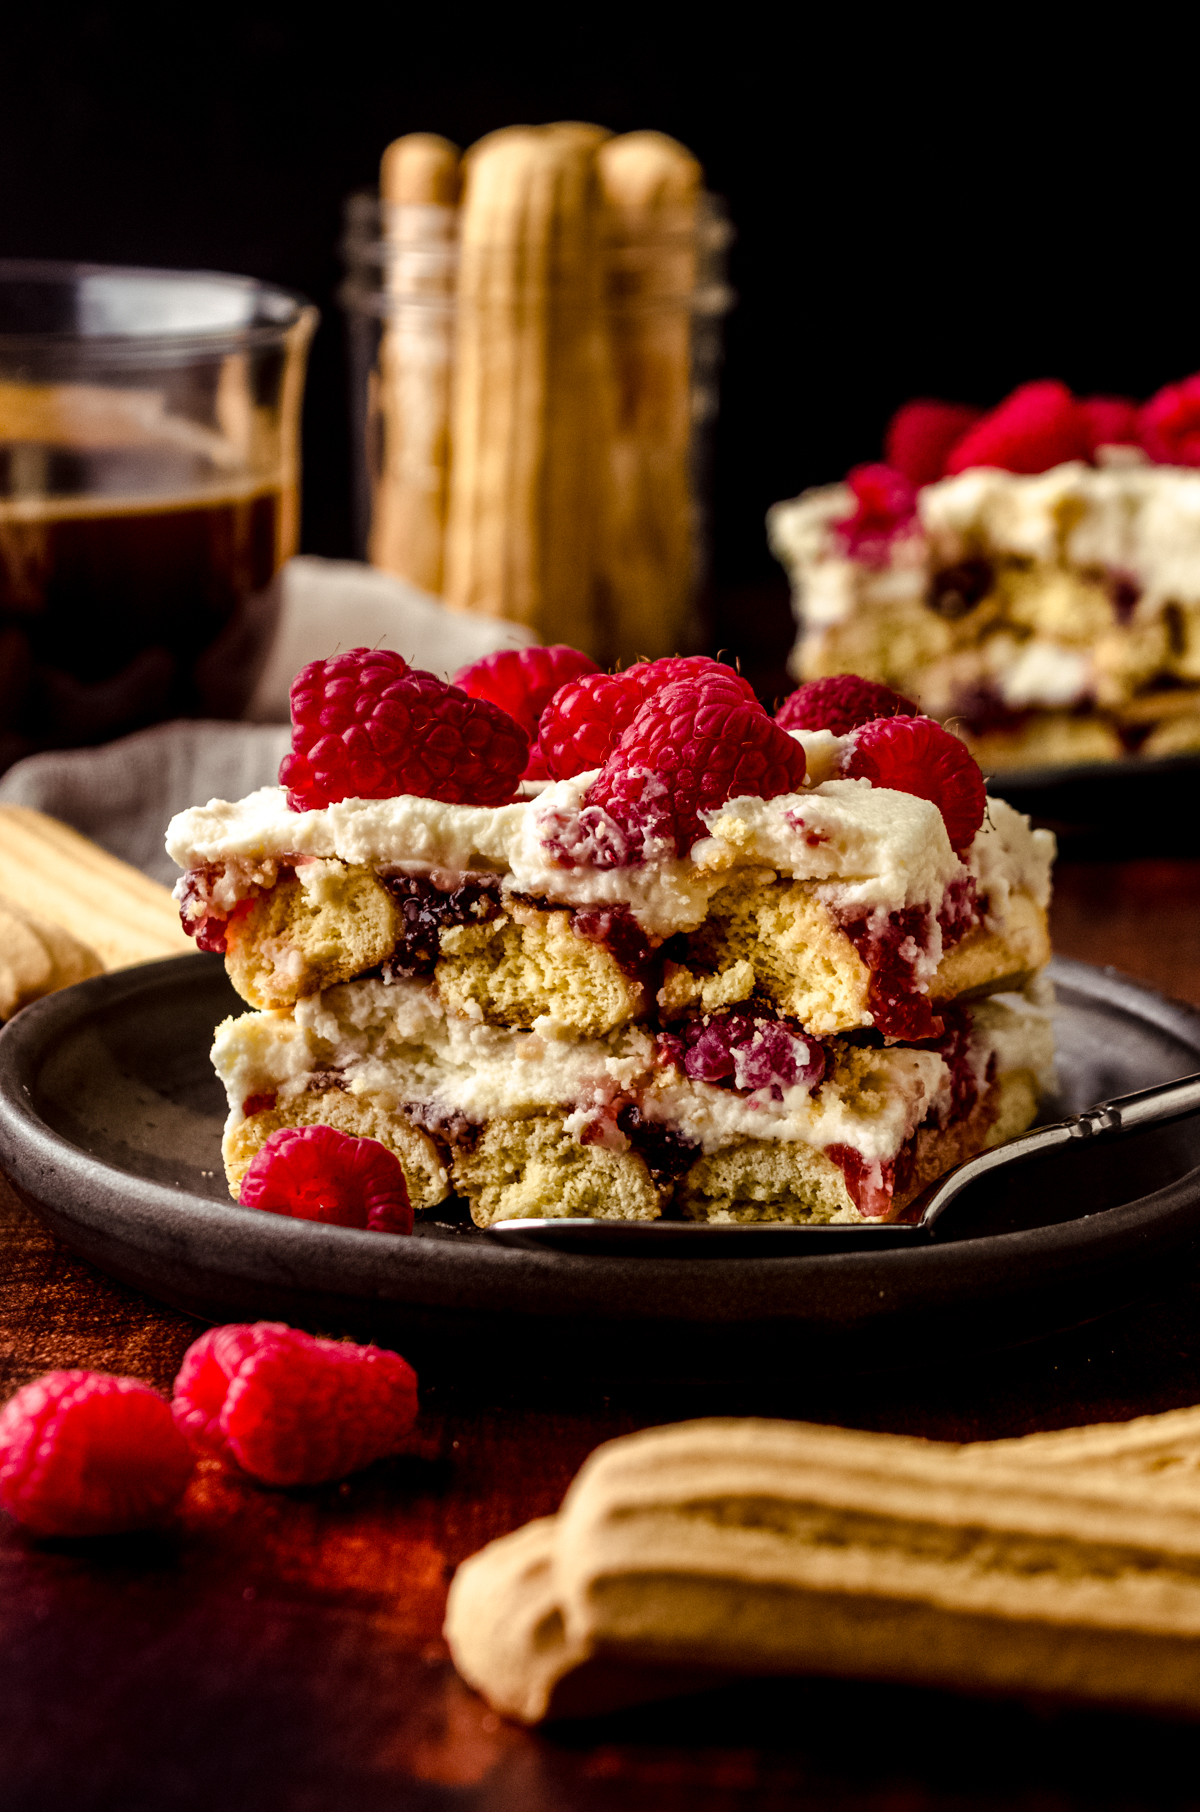 A slice of raspberry tiramisu on a plate with a fork. There is a cup of coffee and a jar of ladyfingers in the background.